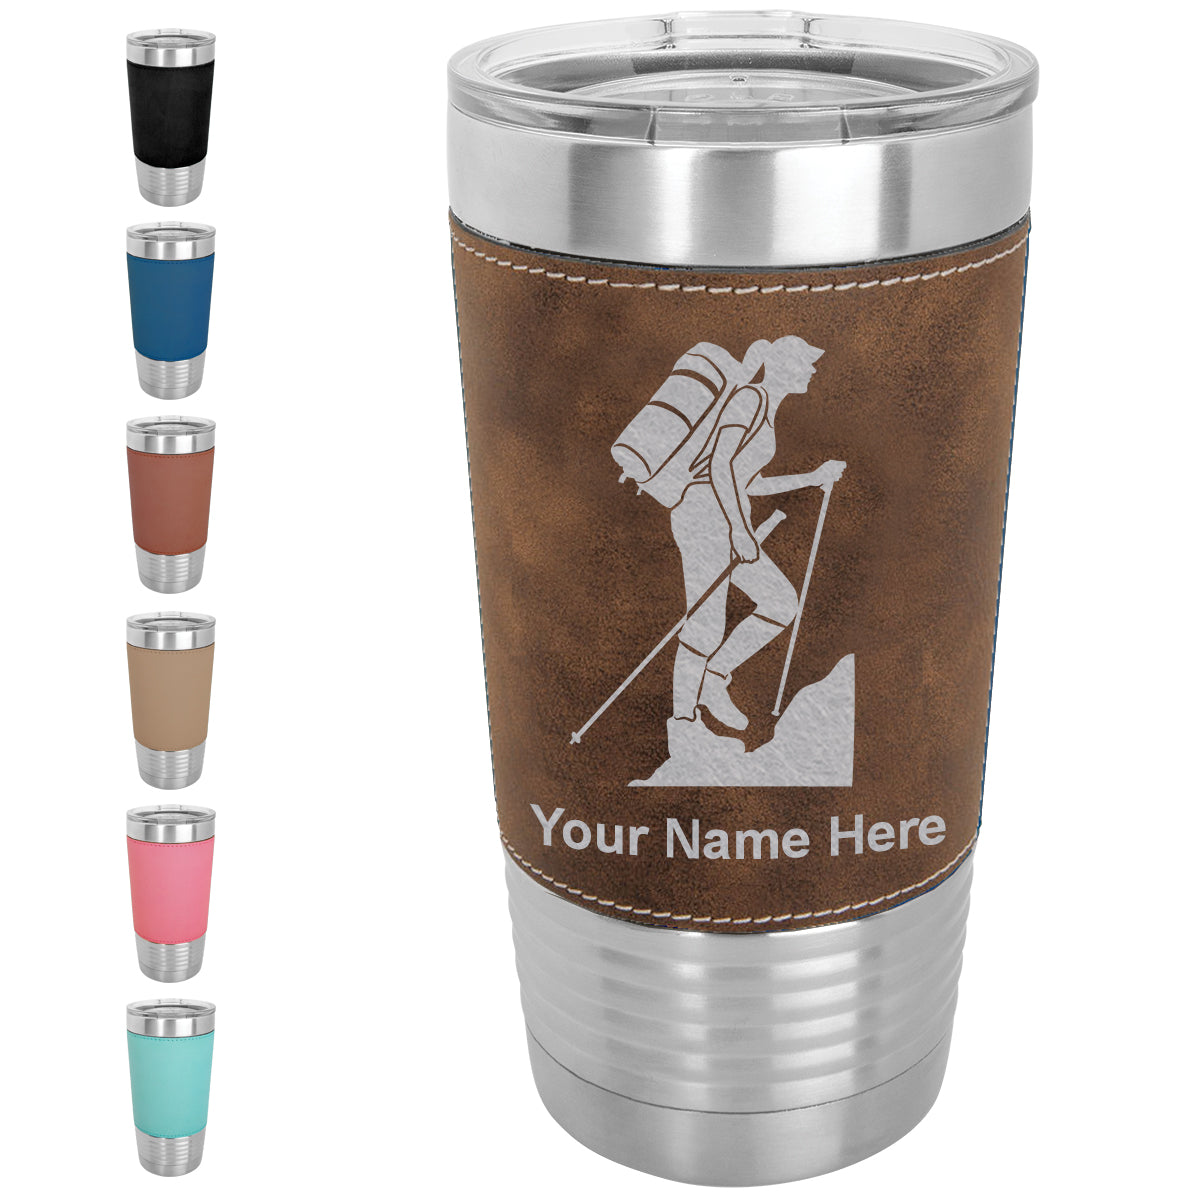 20oz Faux Leather Tumbler Mug, Hiker Woman, Personalized Engraving Included - LaserGram Custom Engraved Gifts